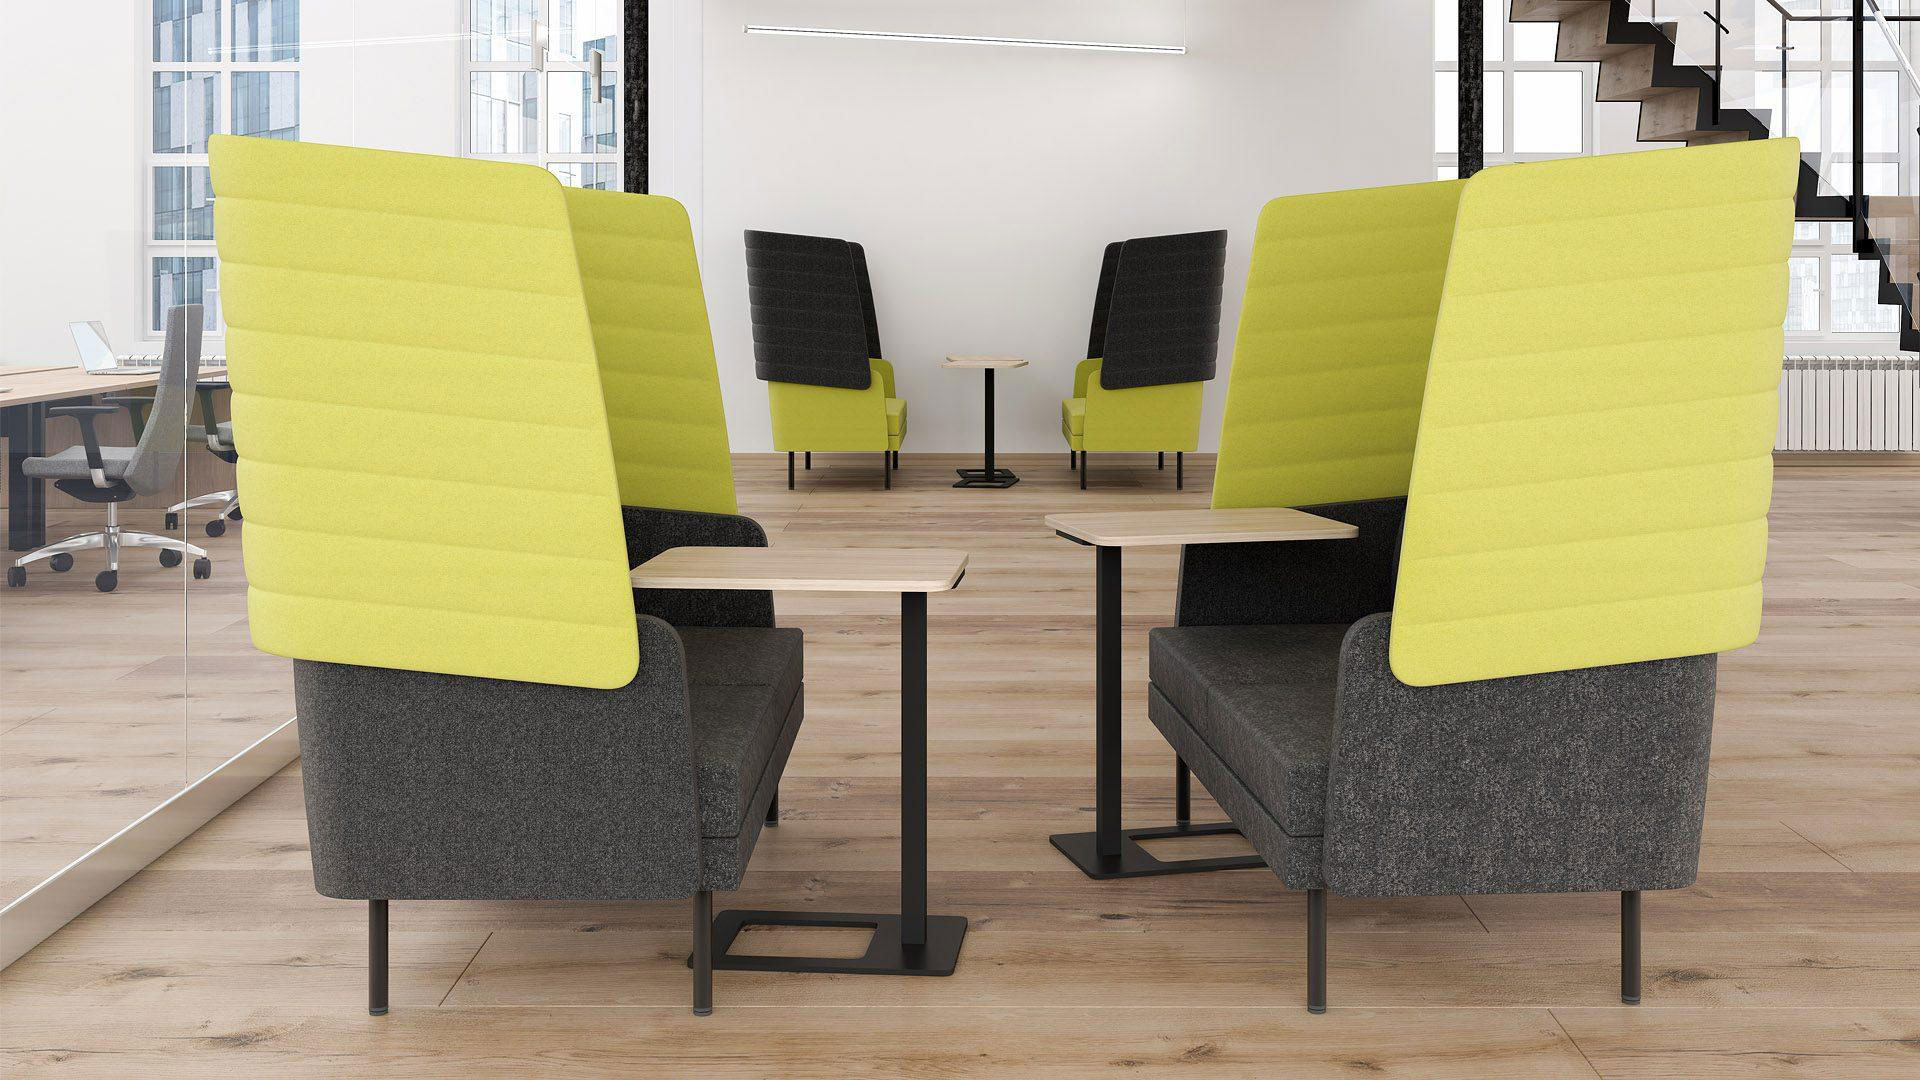 High back acoustic options create quiet meeting spaces